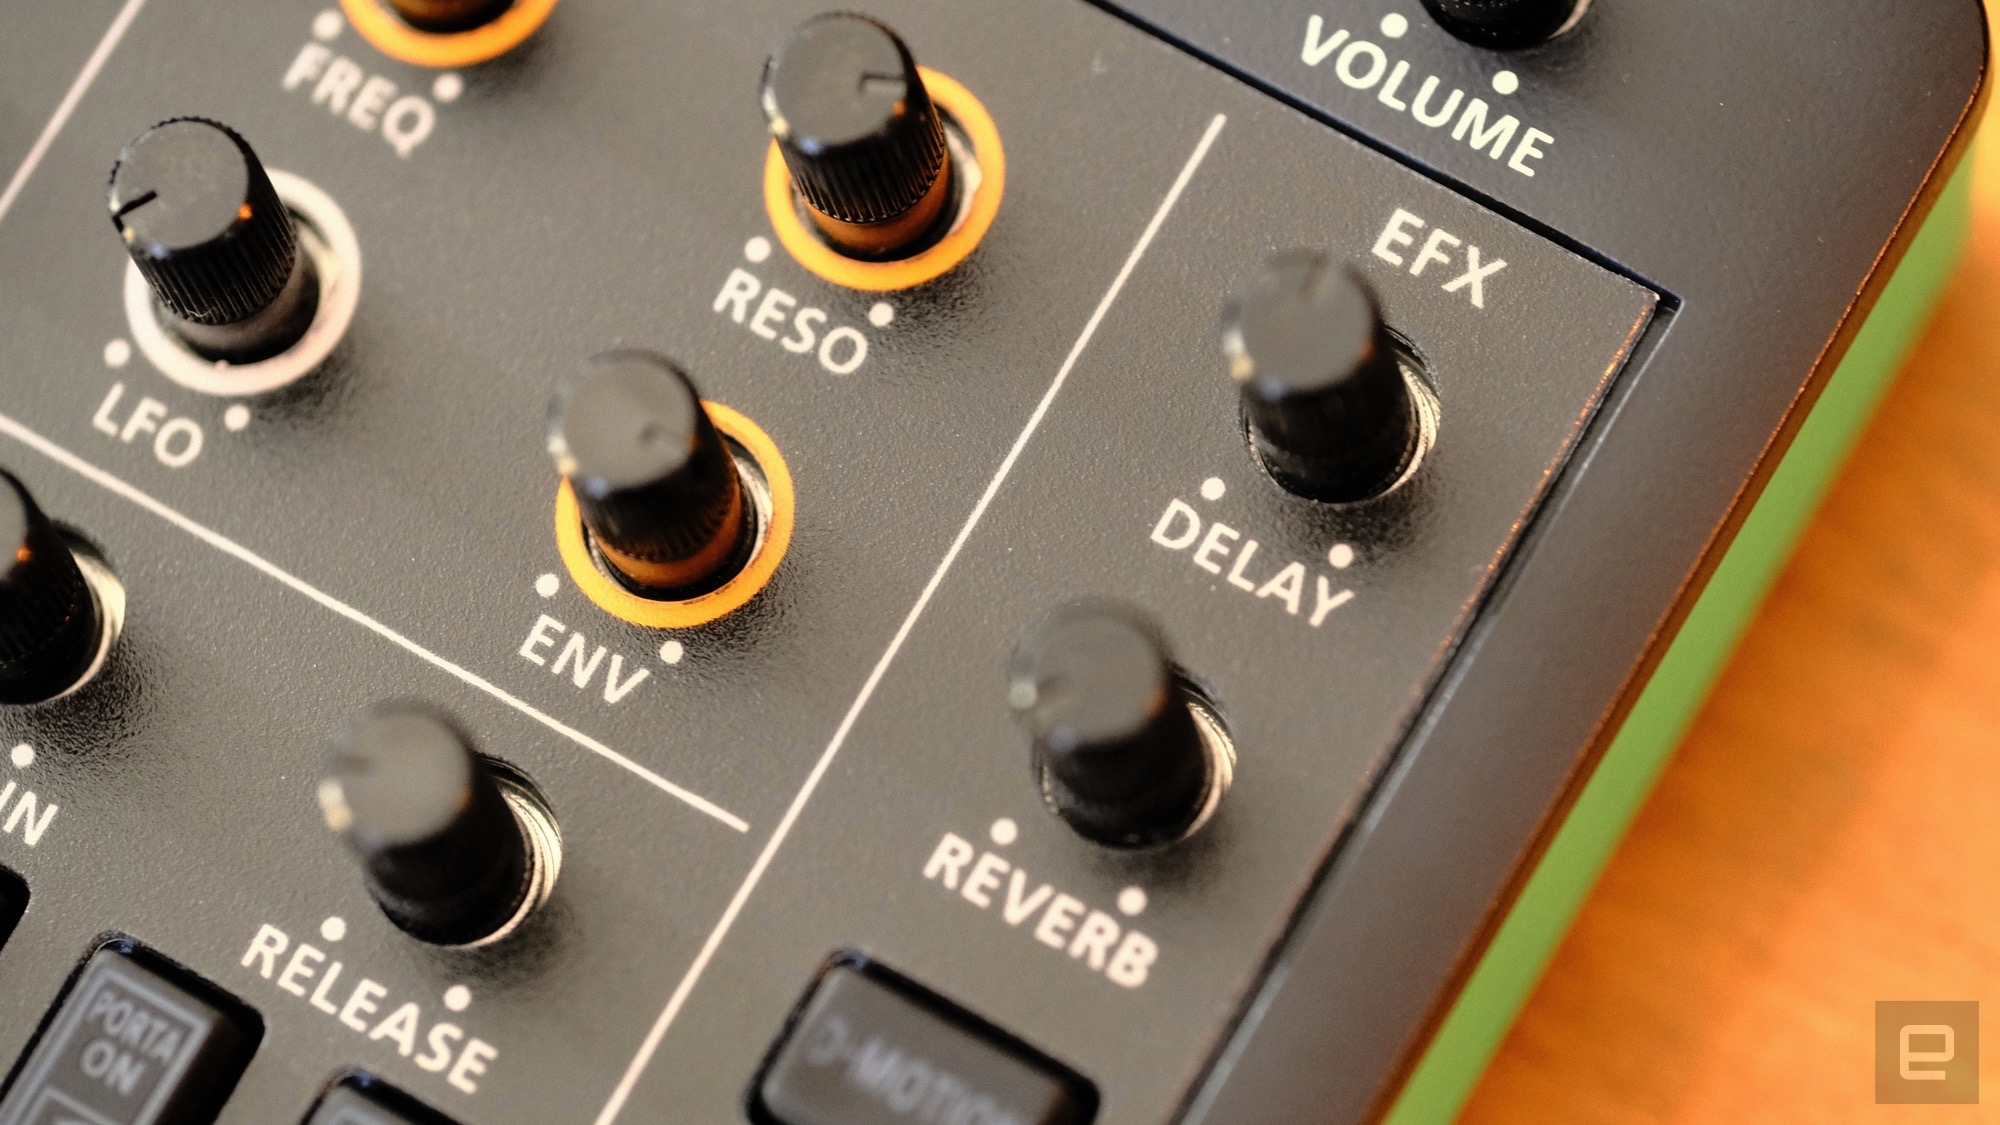 Roland S-1 Tweak Synth is the most compelling member of the Aira Compact family | DeviceDaily.com